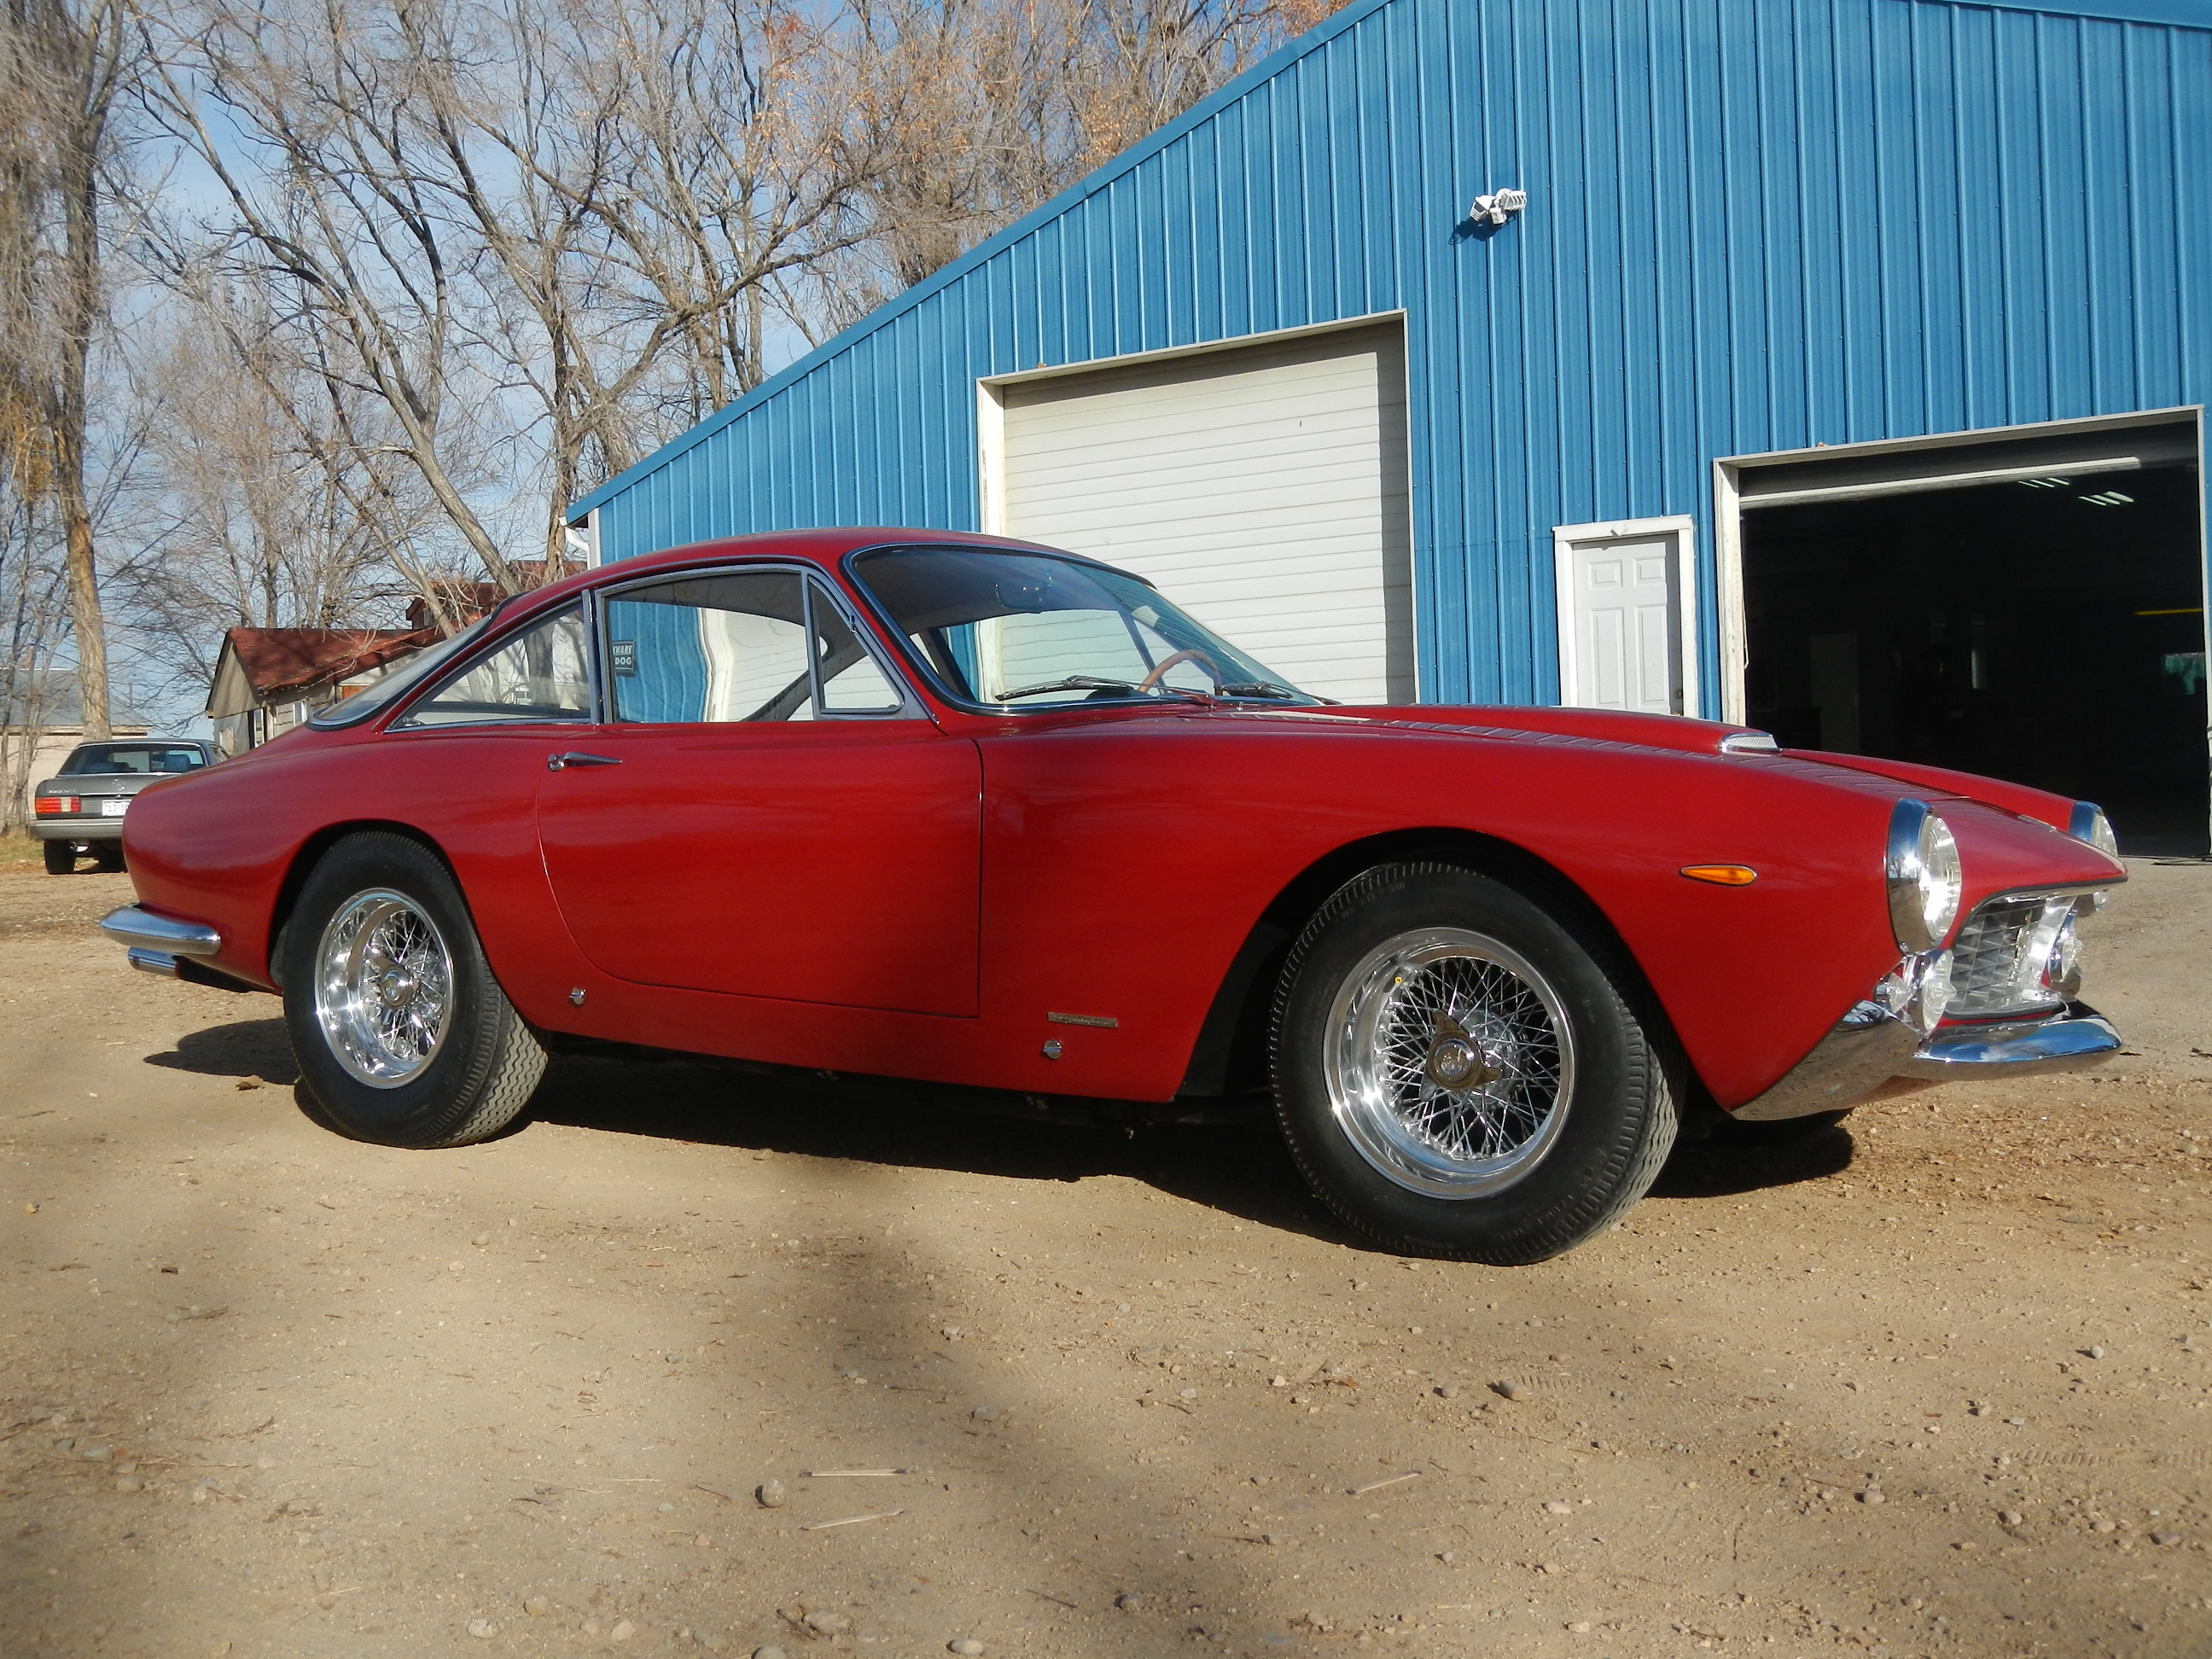 62 Ferrari Lusso 250 GT after picture